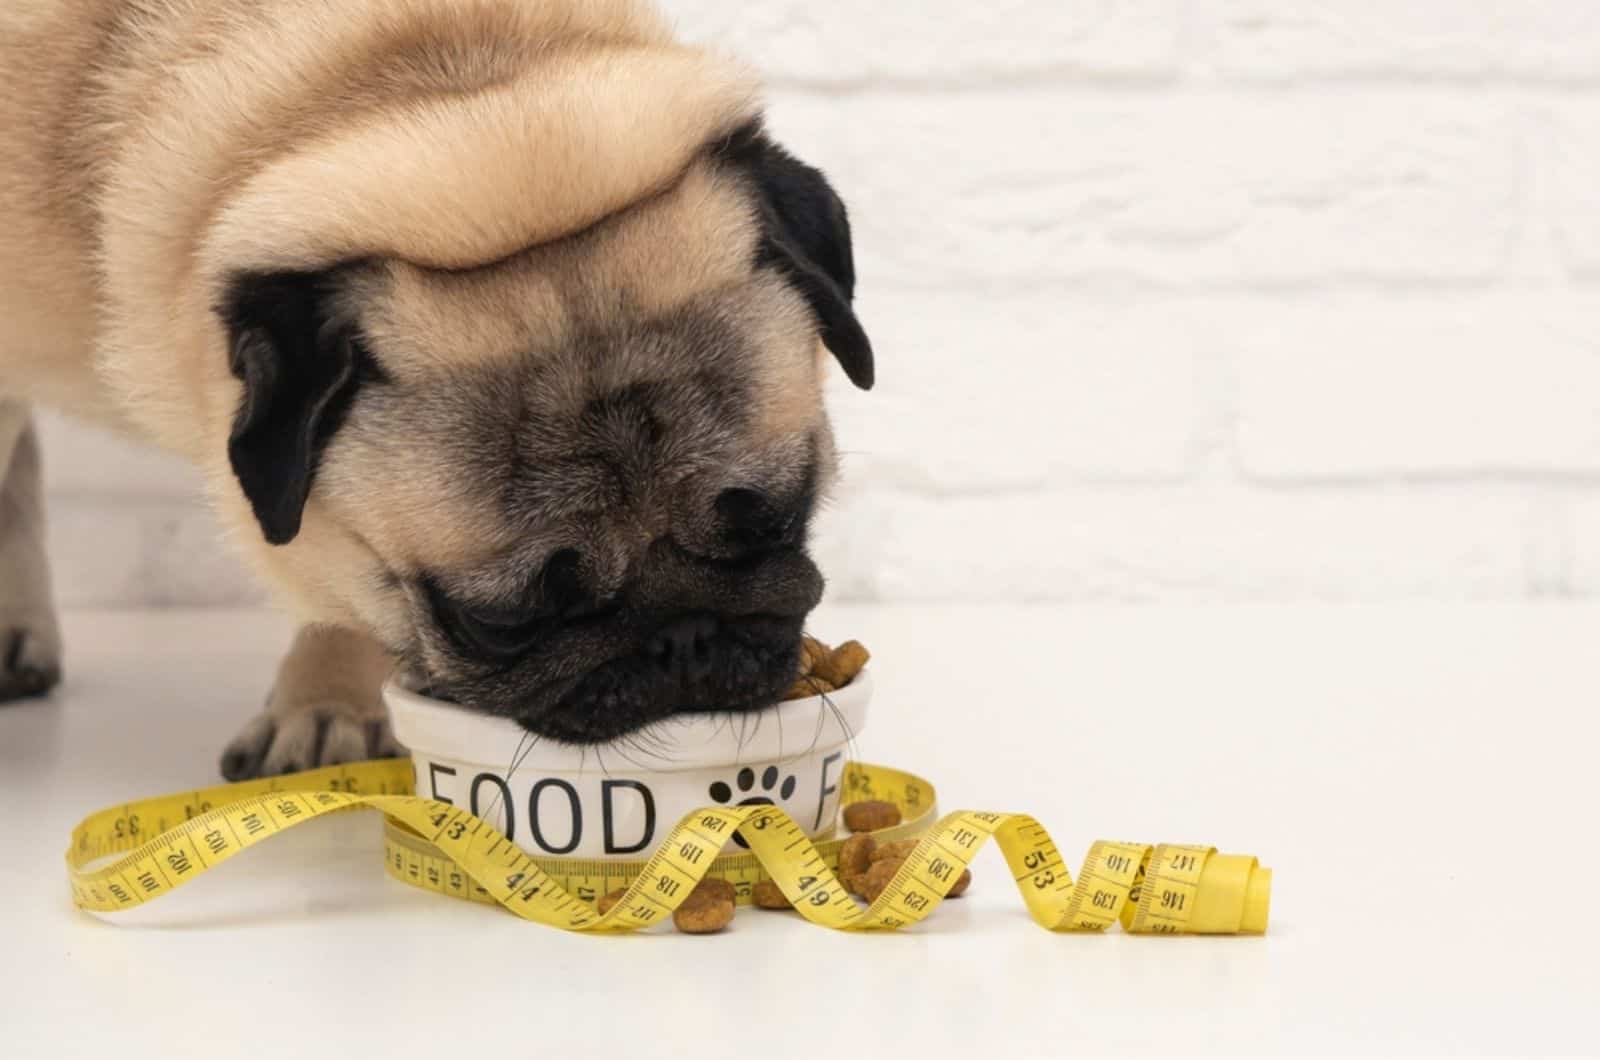 pug eating from a bowl